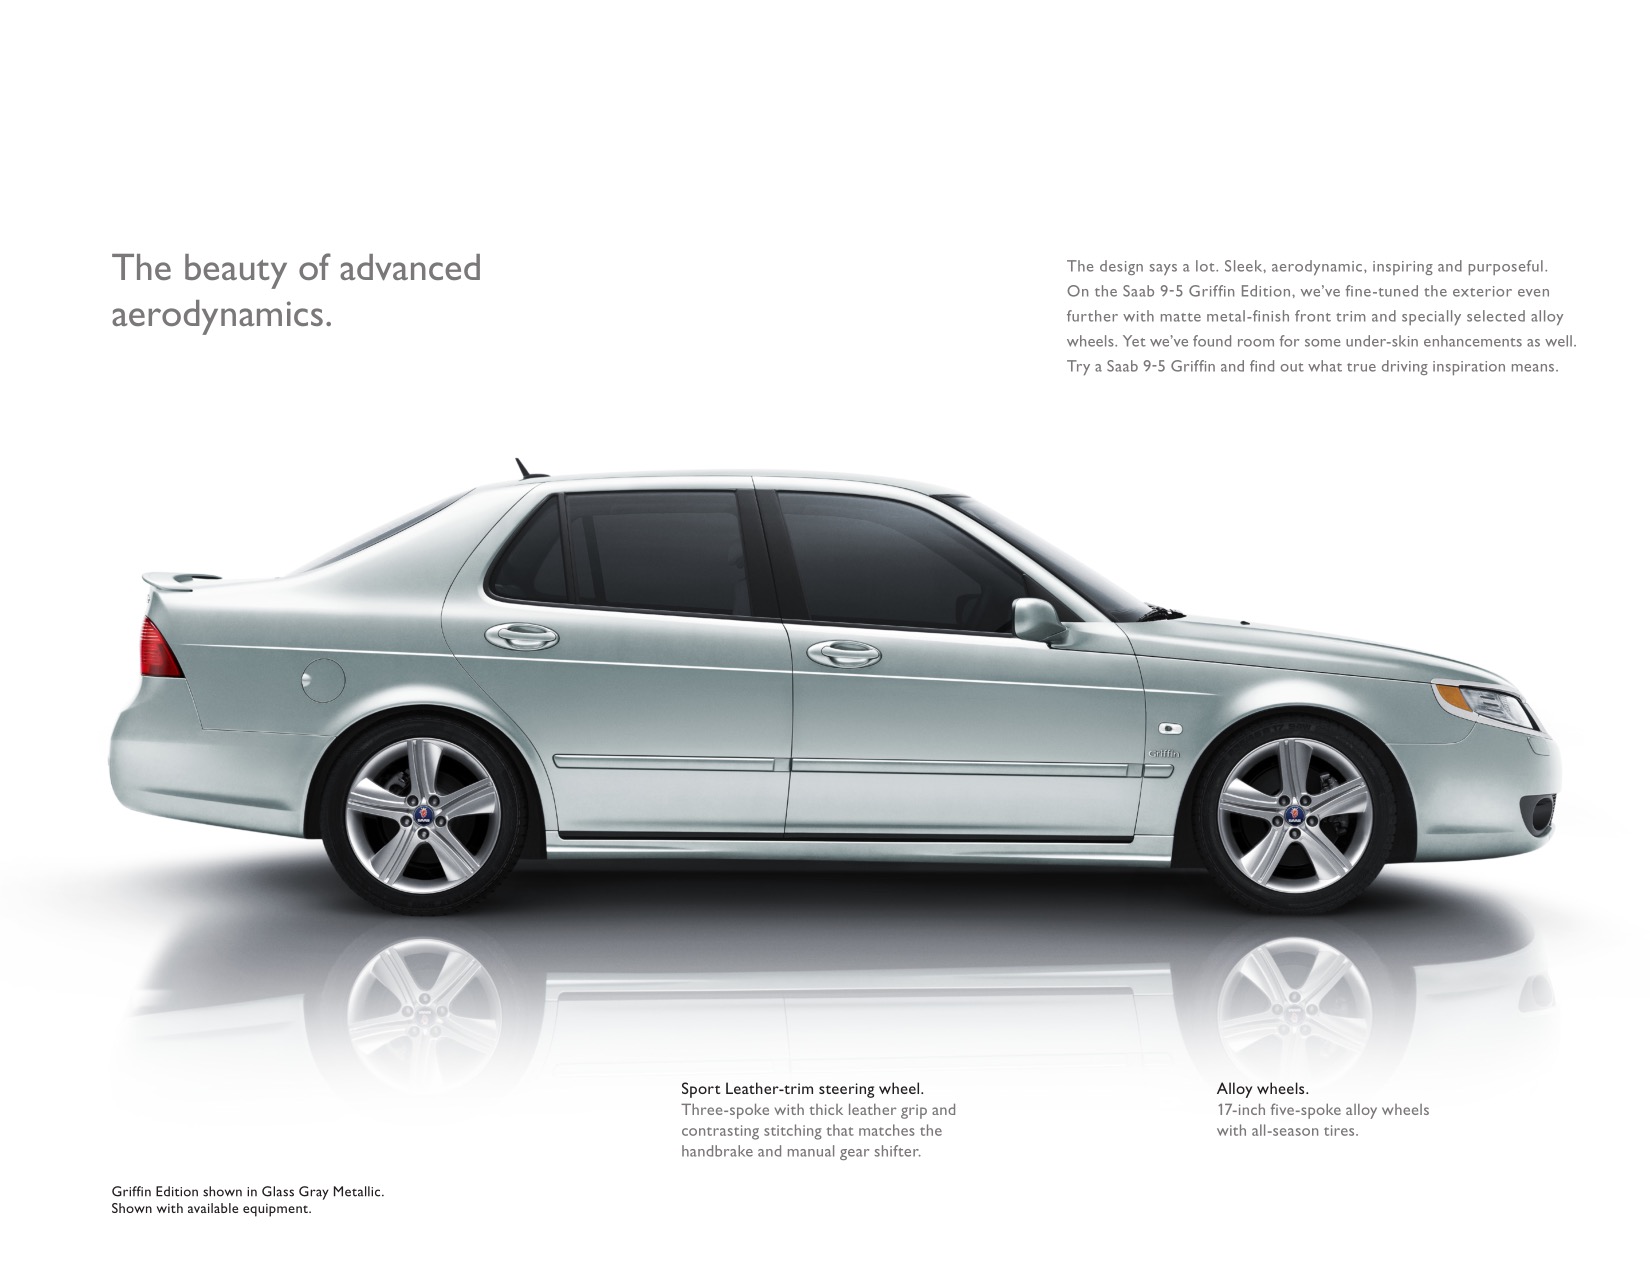 2009 SAAB 9-5 Griffin Brochure Page 9